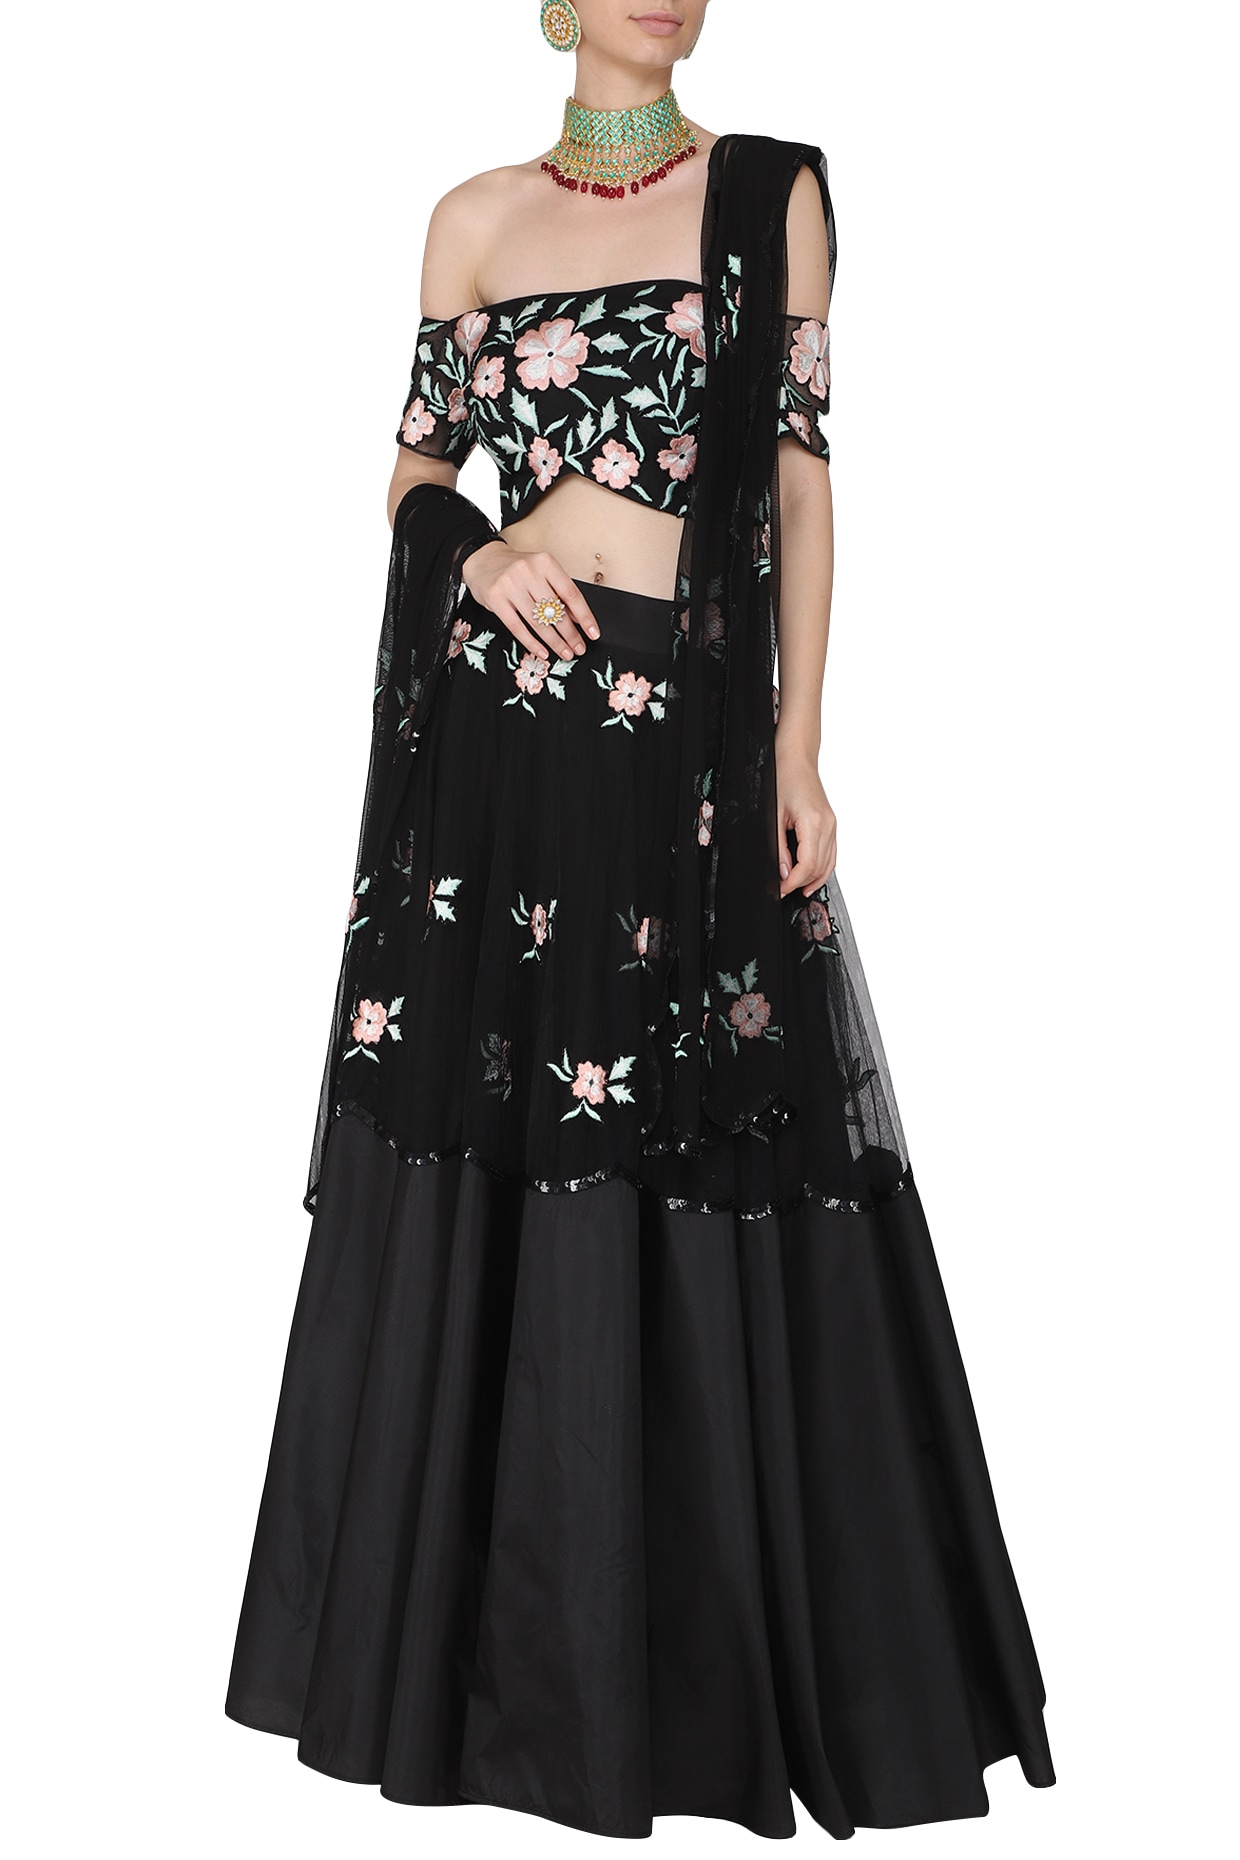 Buy Florence Black and Peach Net Embroidered Lehenga Choli For  Women(LG179-AUG20) at Amazon.in